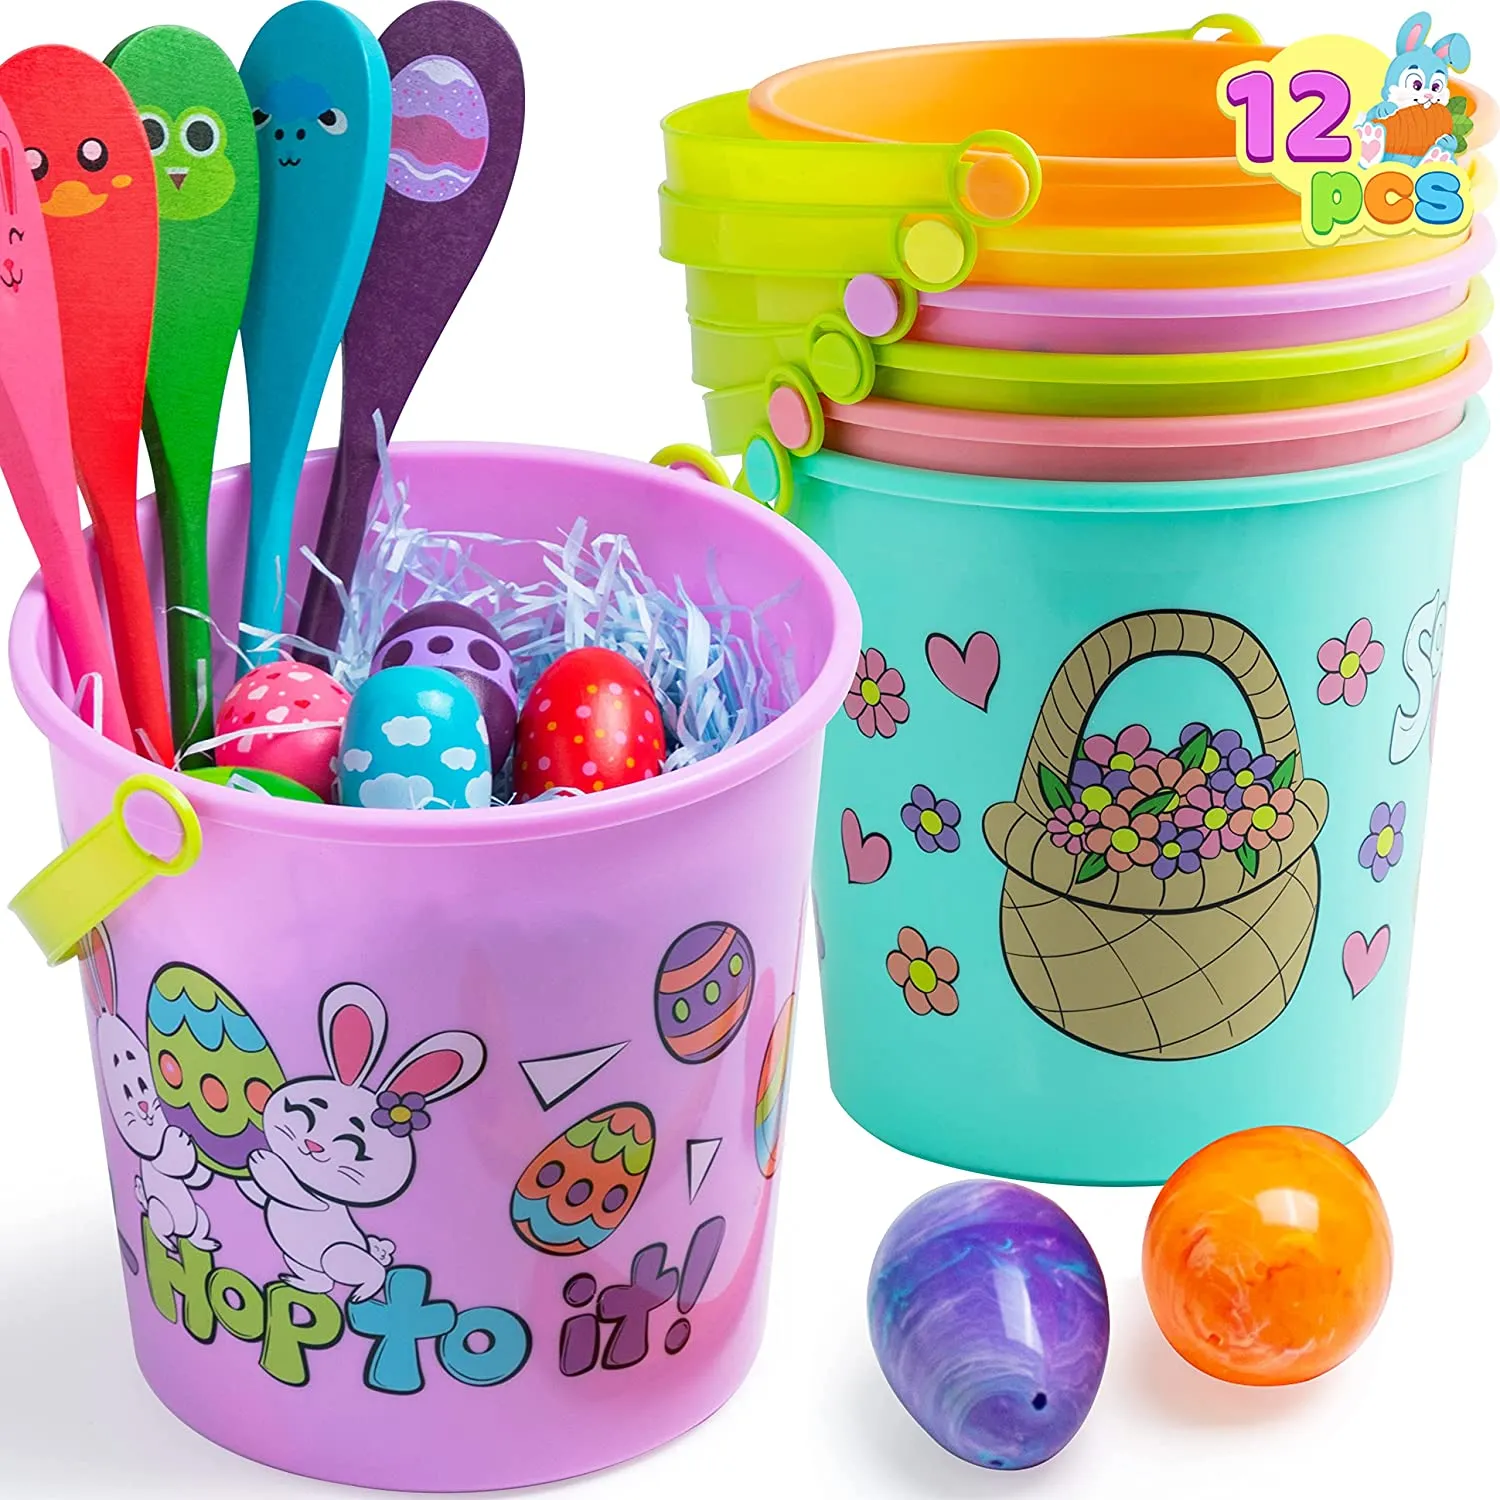 https://www.joyfy.com/wp-content/uploads/2022/03/6Pcs-Multi-Colored-Easter-Plastic-Buckets-with-Handles-2_result.webp